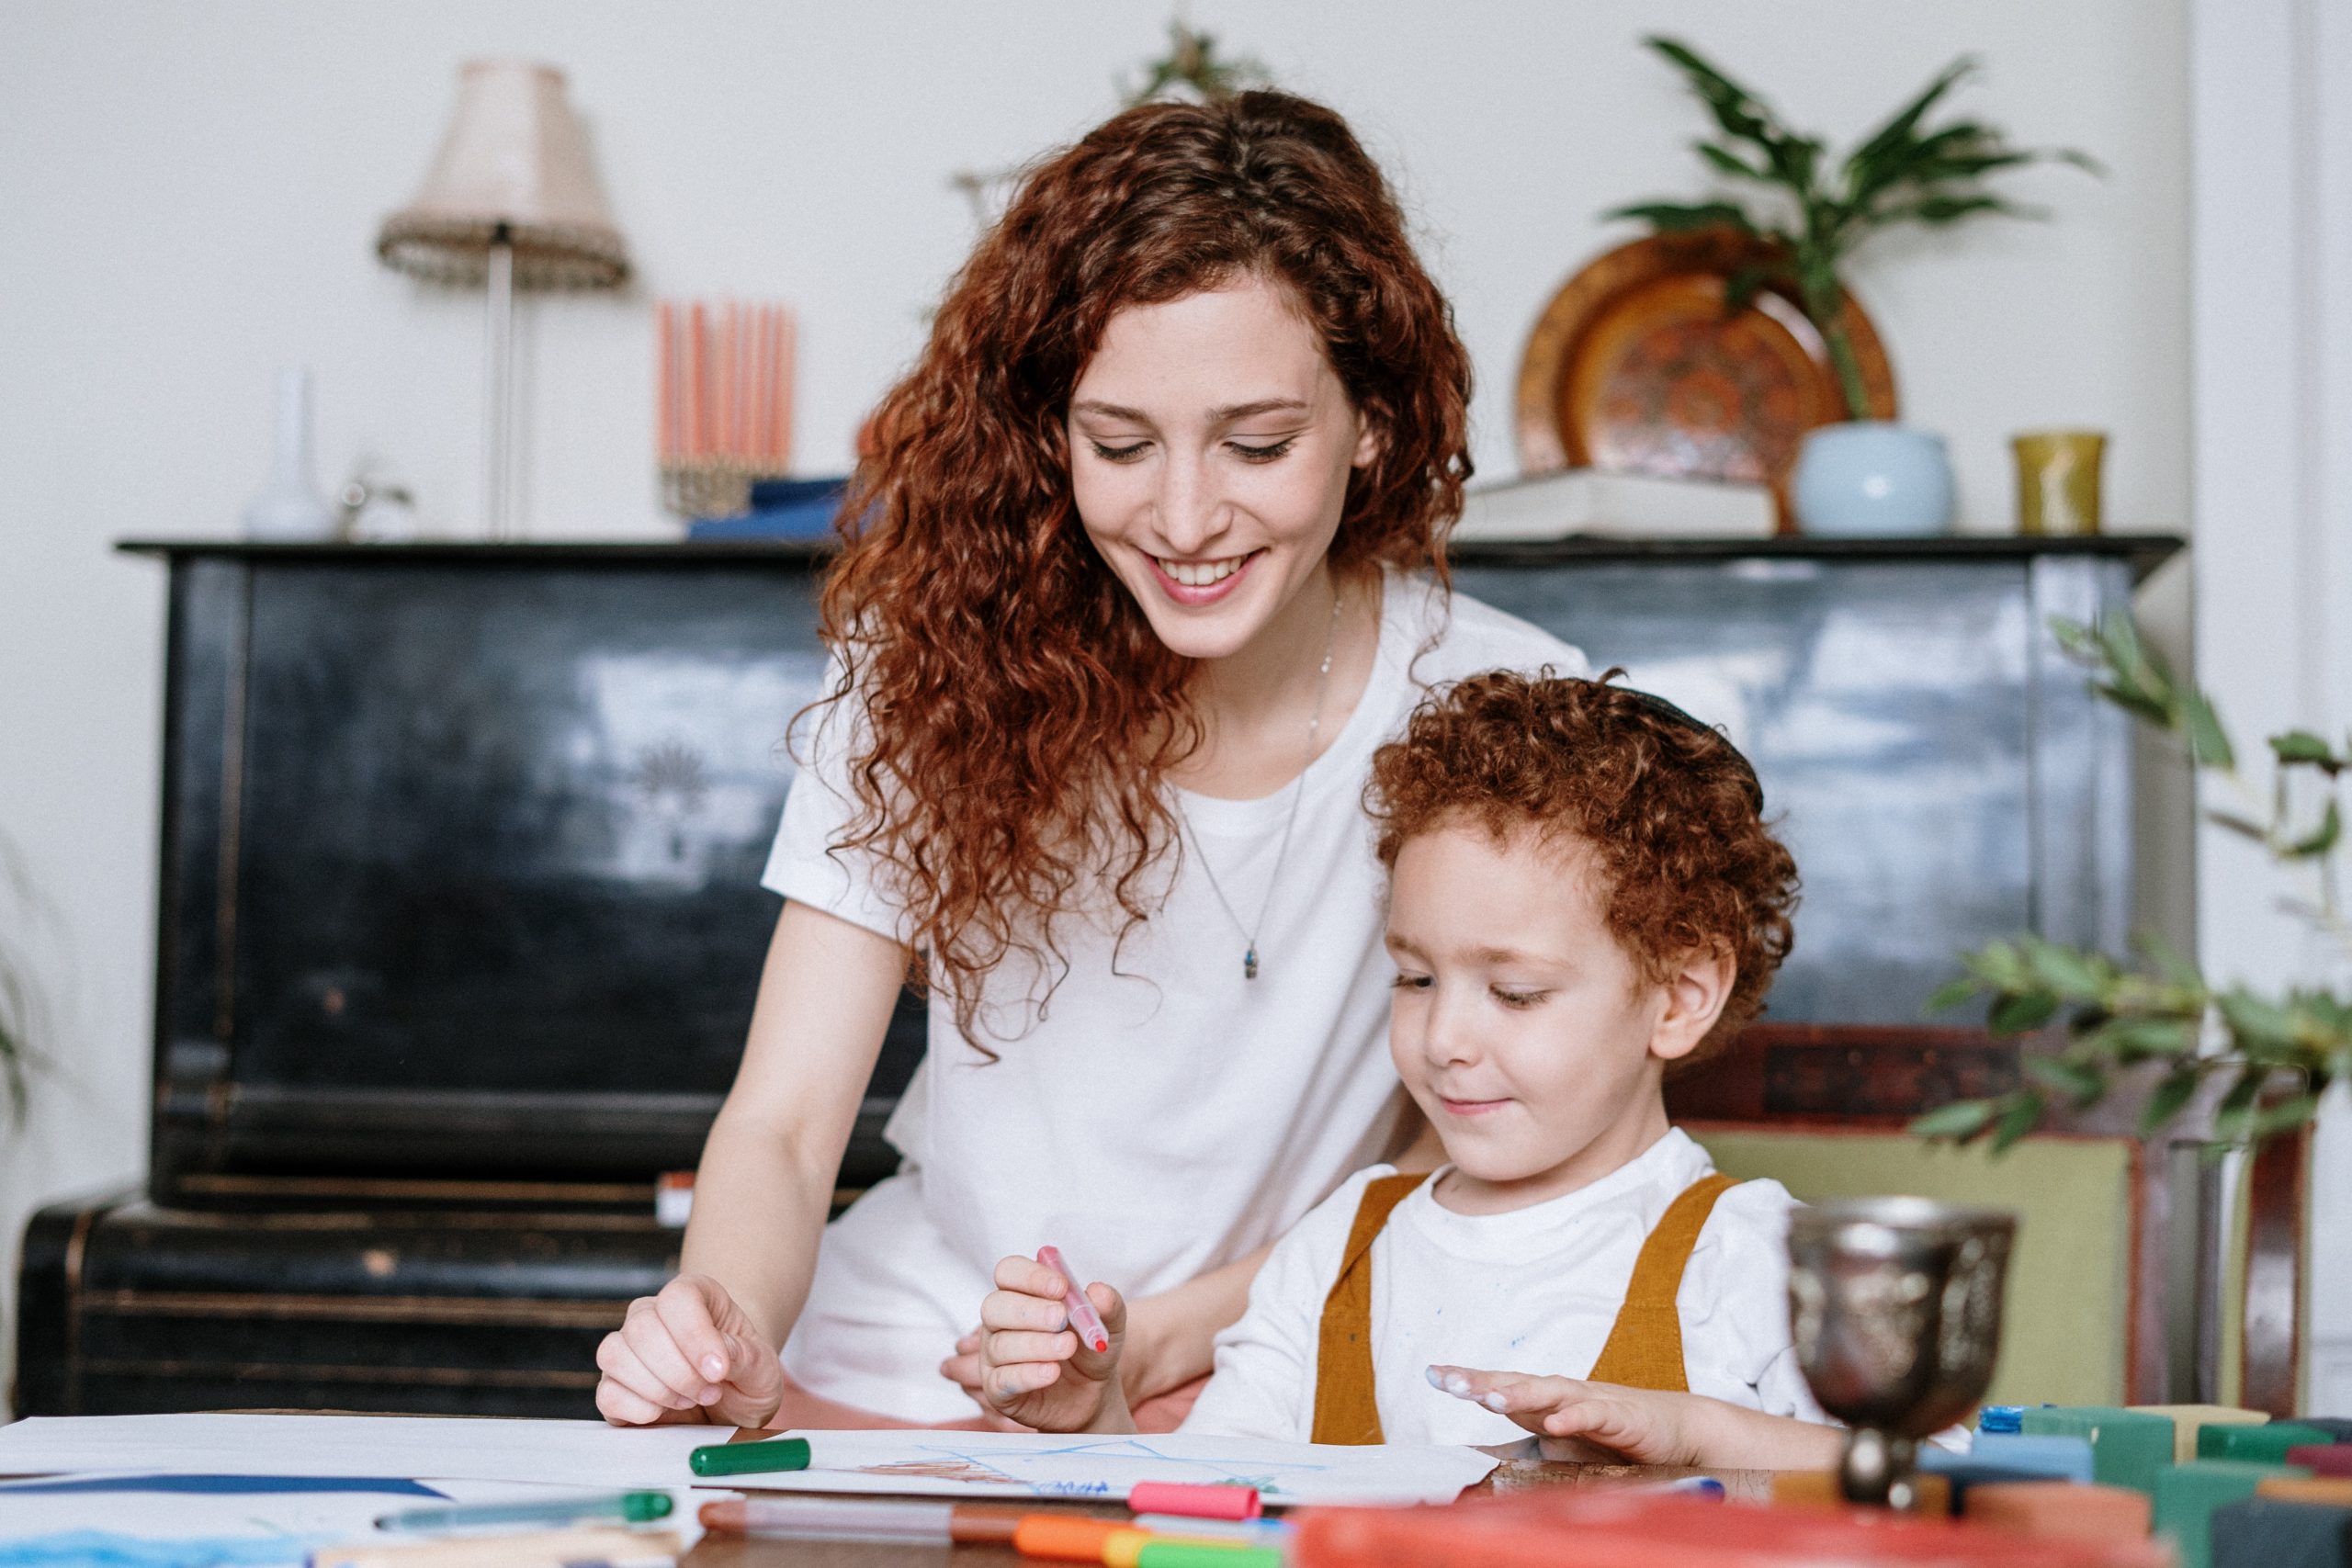 A young mum with curly red hair sits and plays at a able with her young son, who has matching red curly hair. 